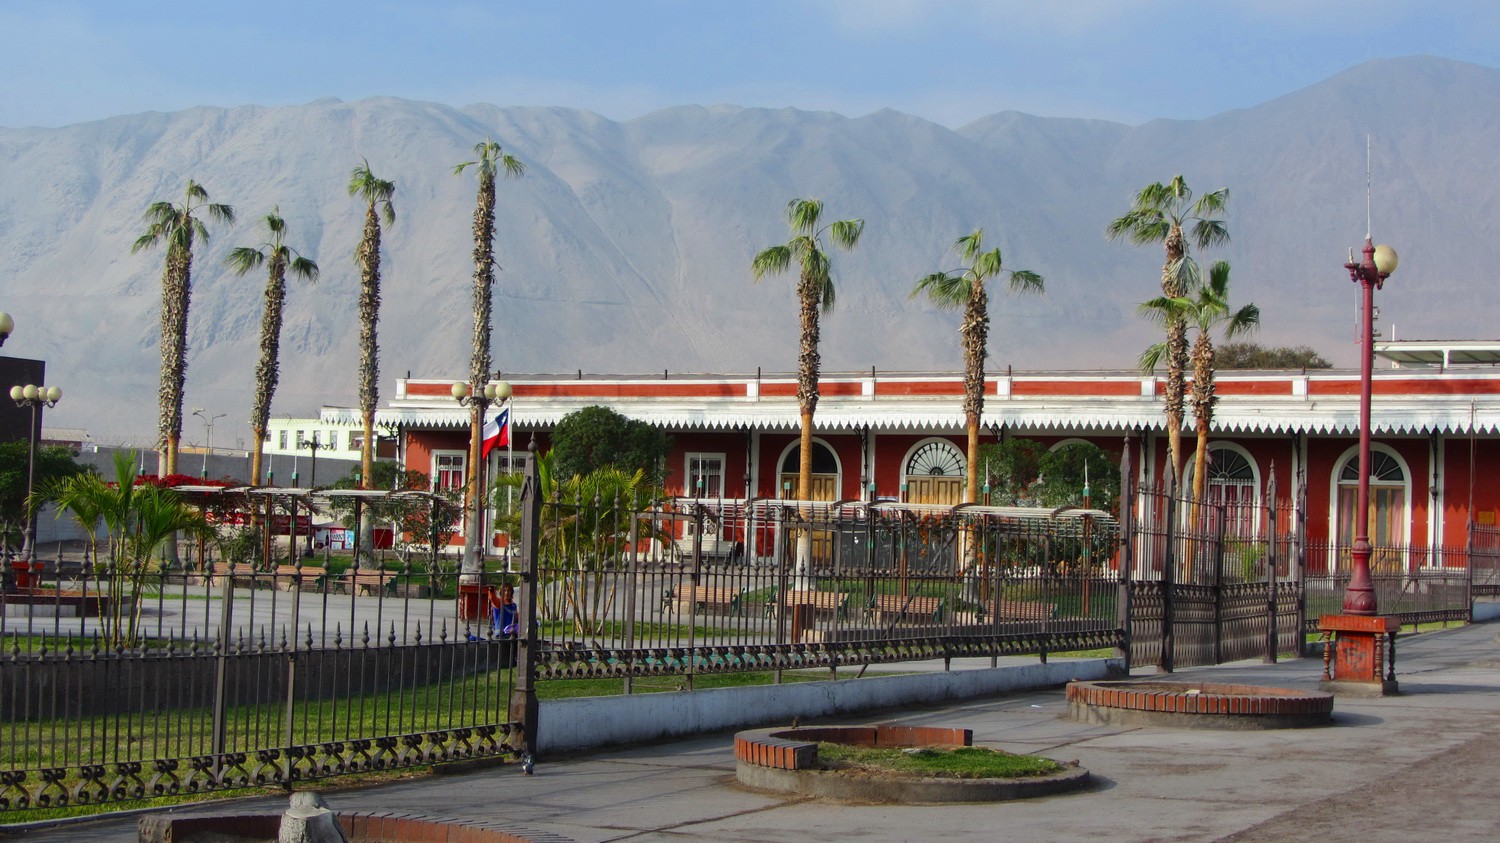 Justice palace of Iquique